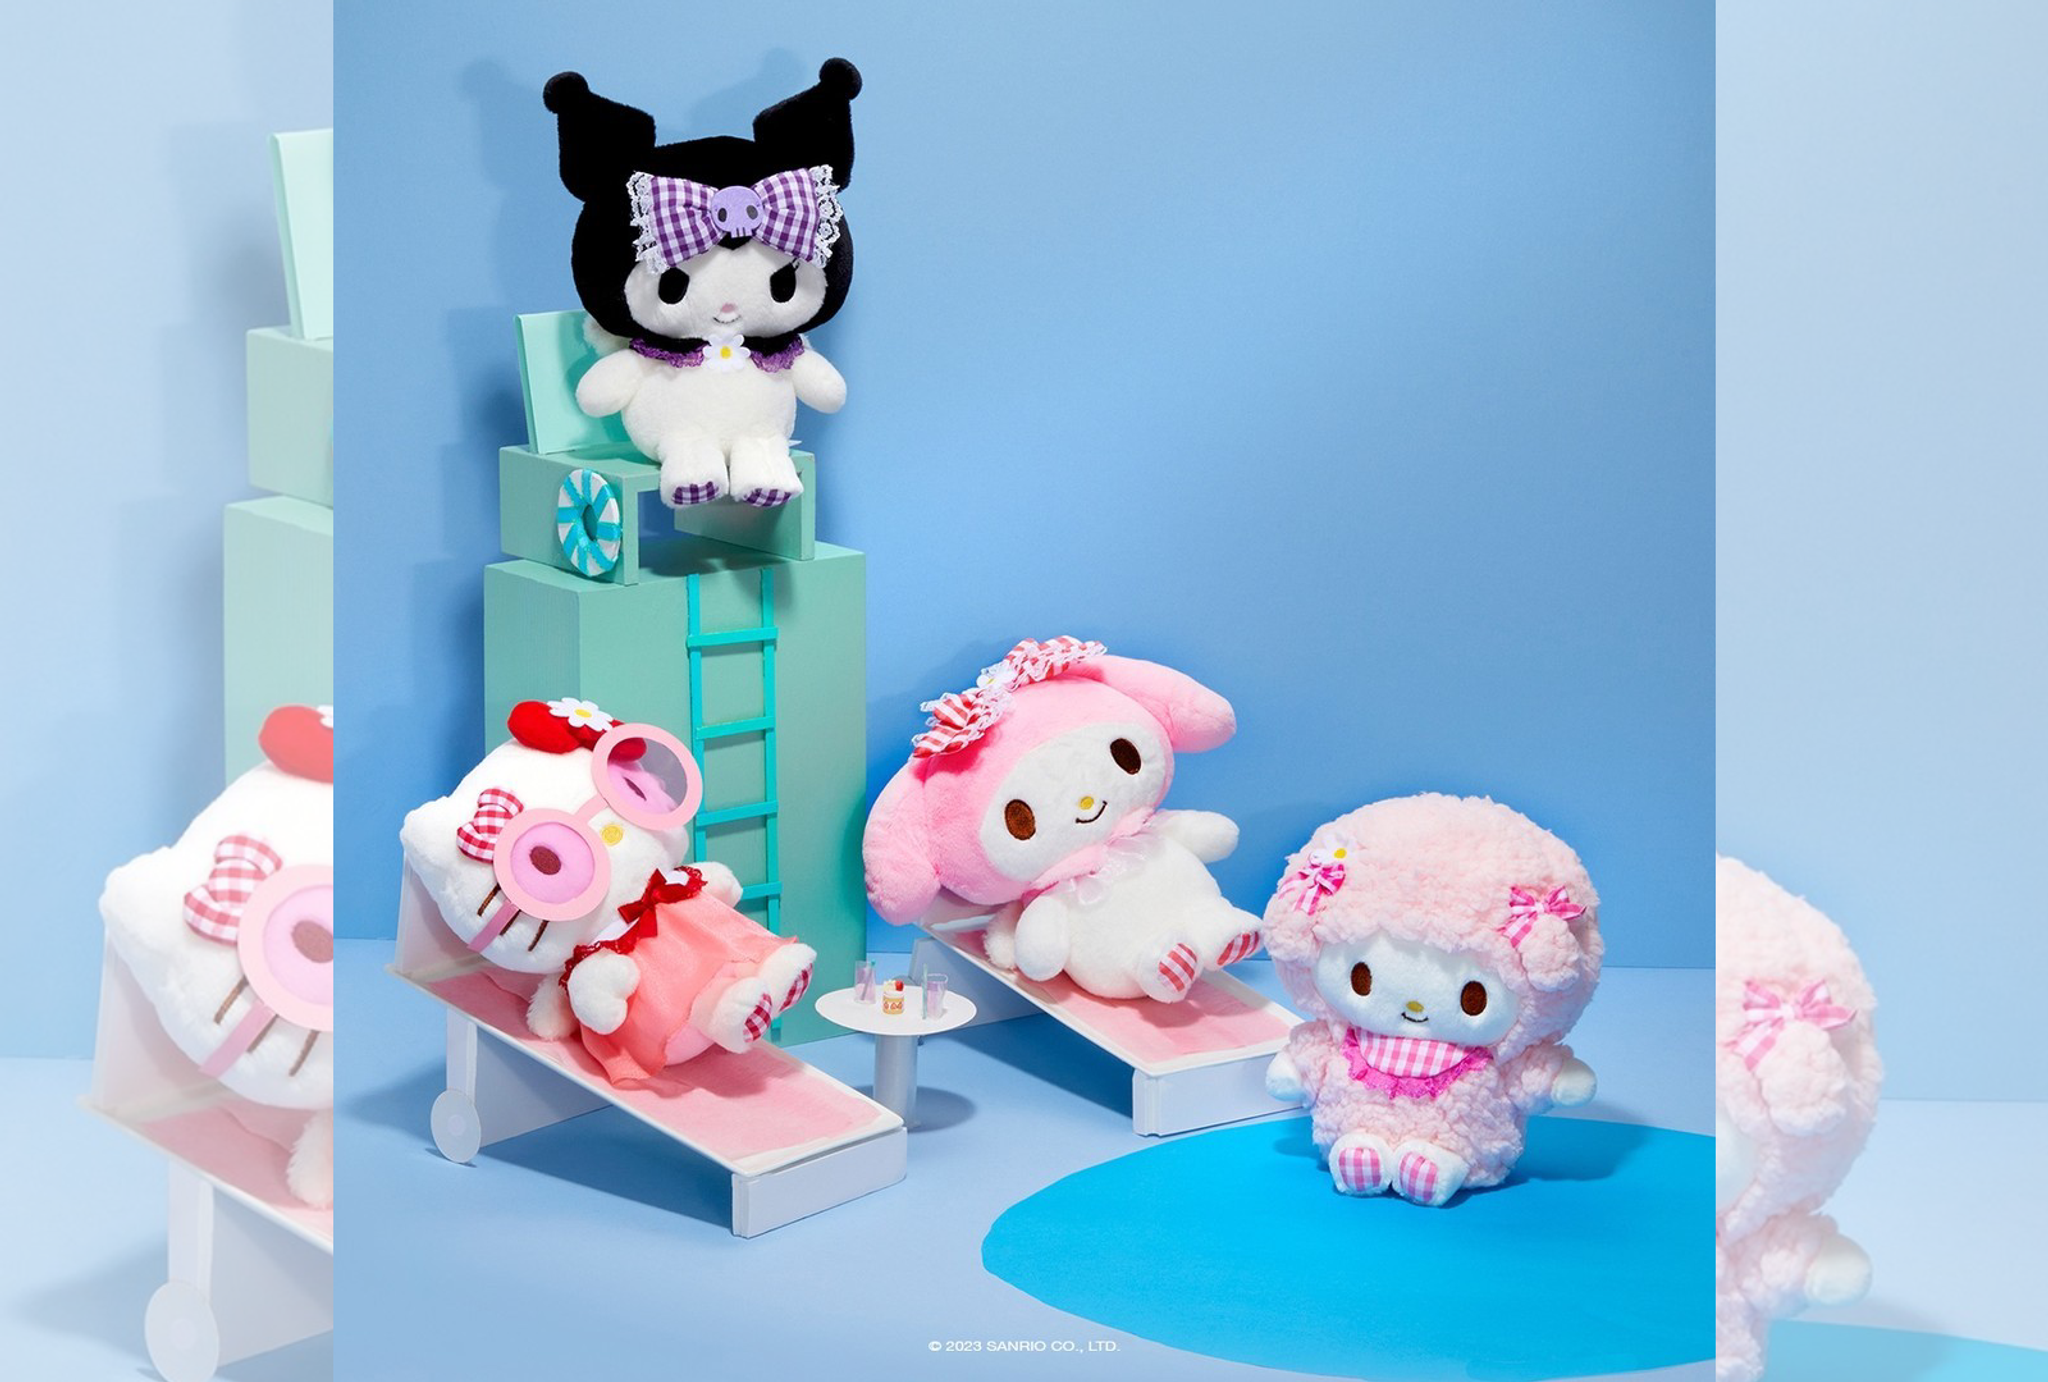 Sanrio: Gen Y and Z are reviving a classic toy brand